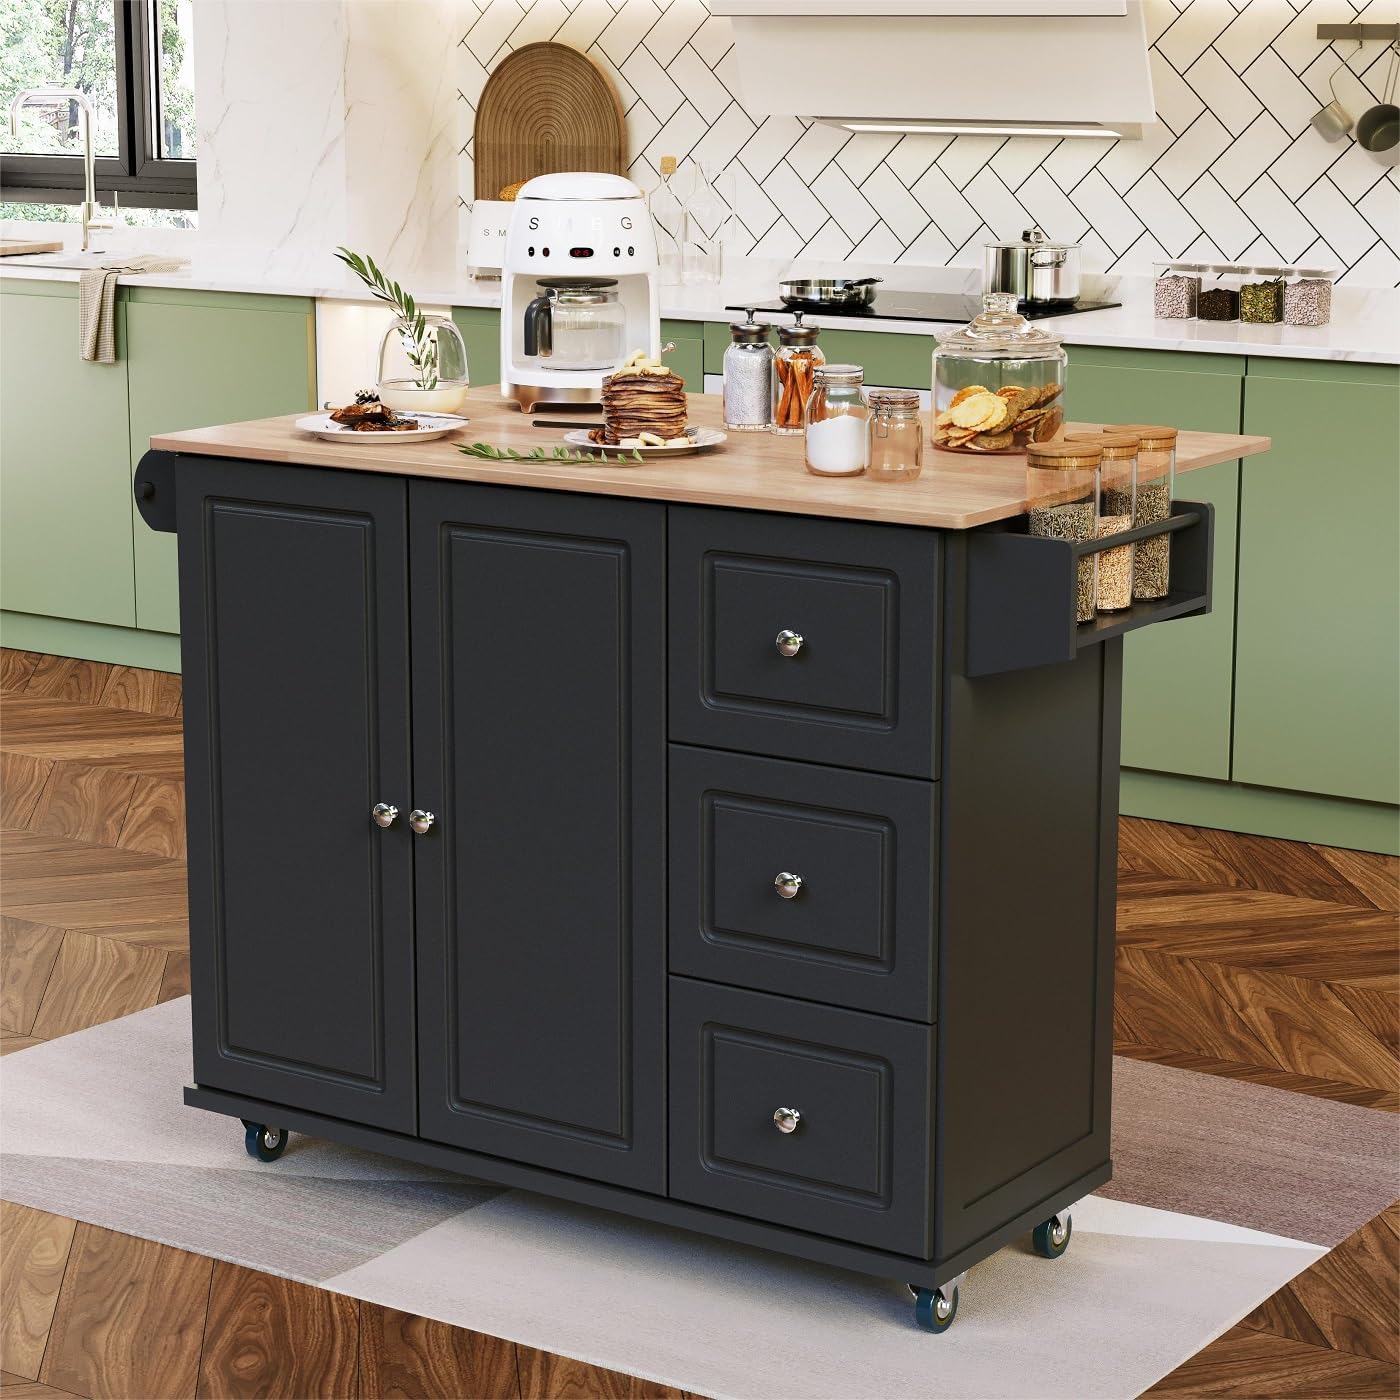 MFSTUDIO Rolling Kitchen Island on Wheels with Drop-Leaf, Mobile Kitchen Island Cart with 3 Drawers Storage Cabinet, Wood Countertop, Adjustable Shelf, Towel Bar and Spice Rack for Dining Room, Black